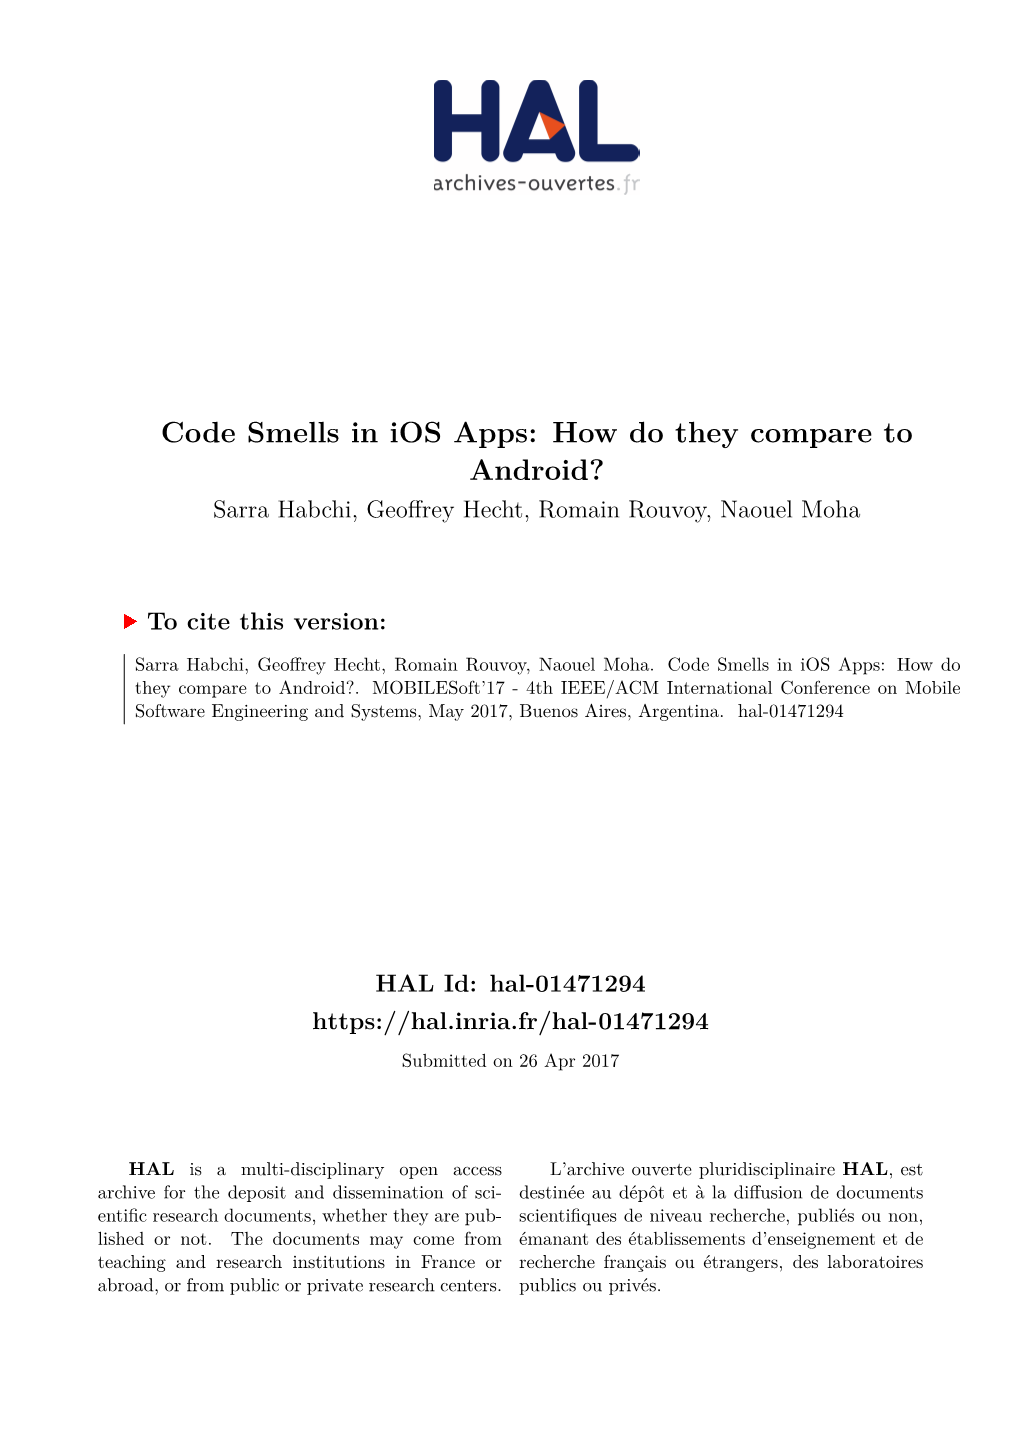 Code Smells in Ios Apps: How Do They Compare to Android? Sarra Habchi, Geoffrey Hecht, Romain Rouvoy, Naouel Moha